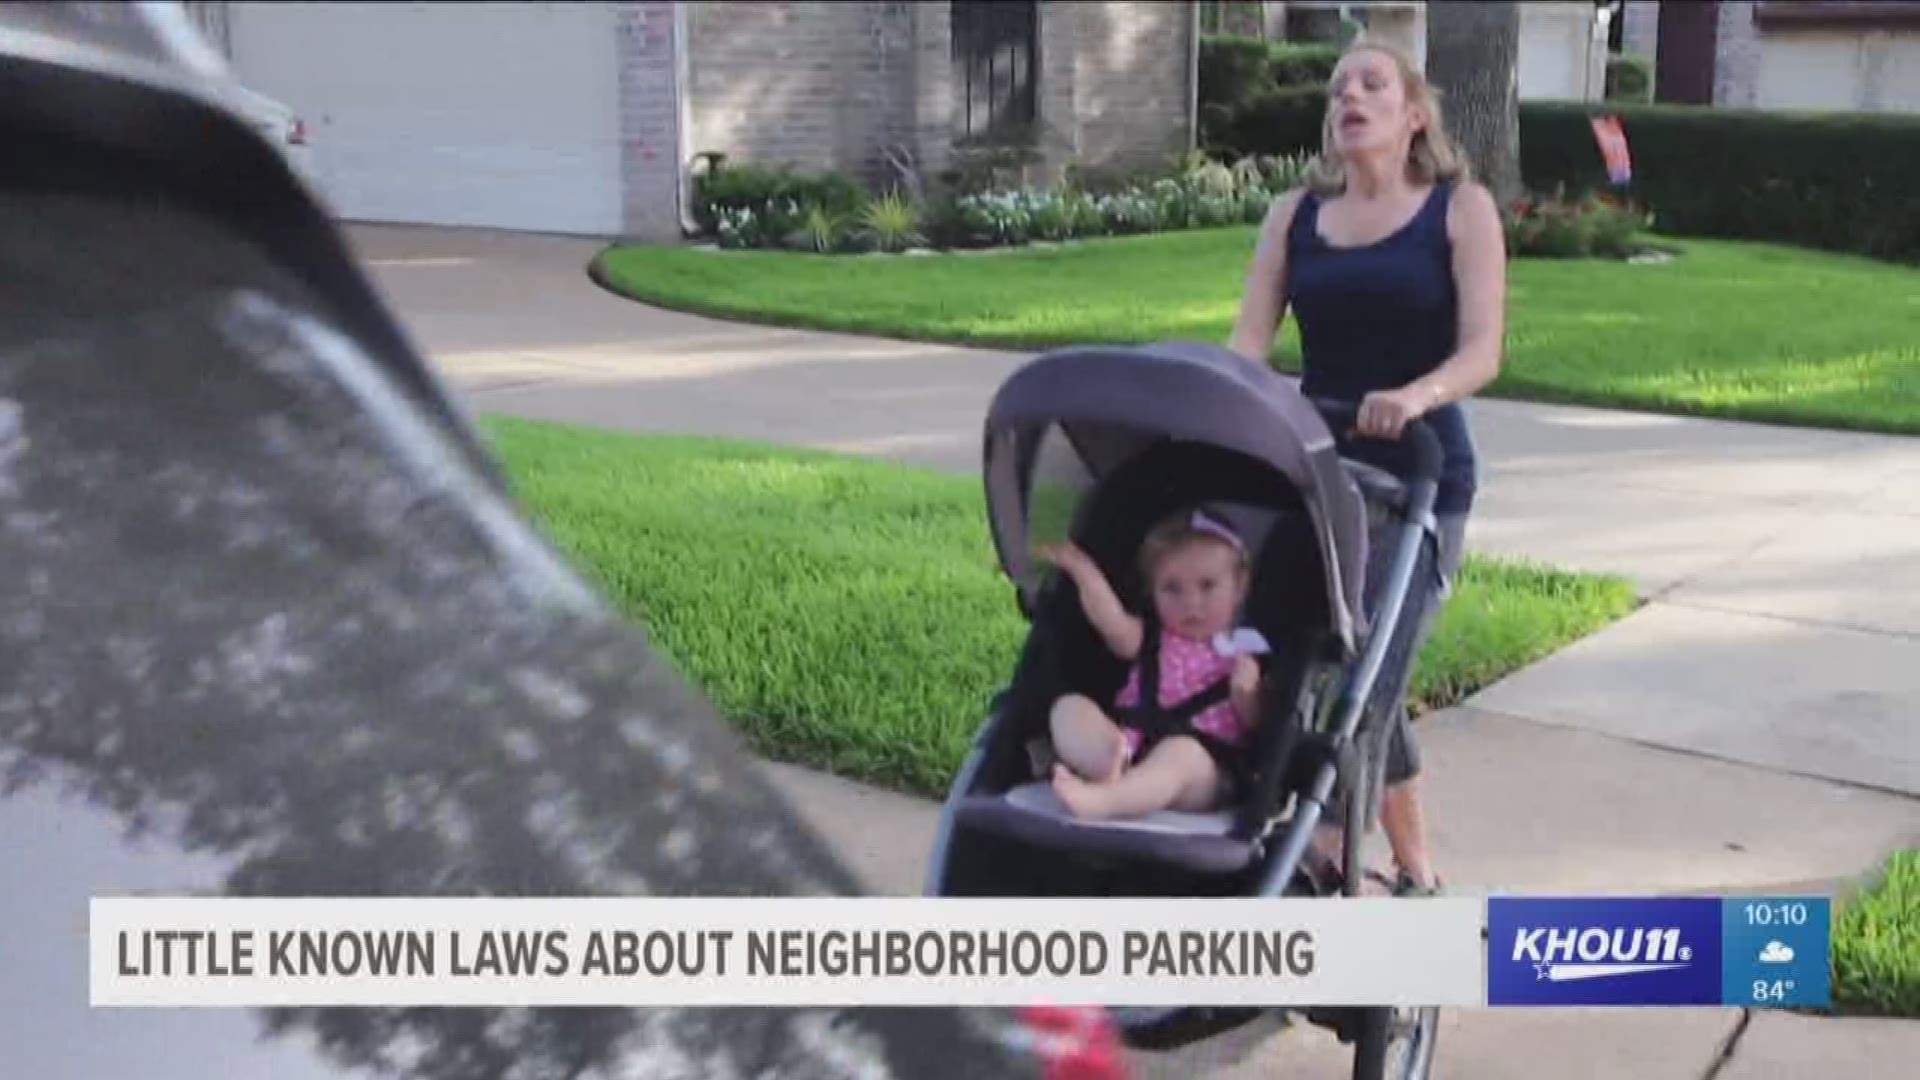 Ever go for a walk in your neighborhood and get frustrated because the sidewalks are blocked by vehicles or trash cans? Or what about almost driving into a vehicle because it's parked facing the wrong way on a street? These are common issues that plague m